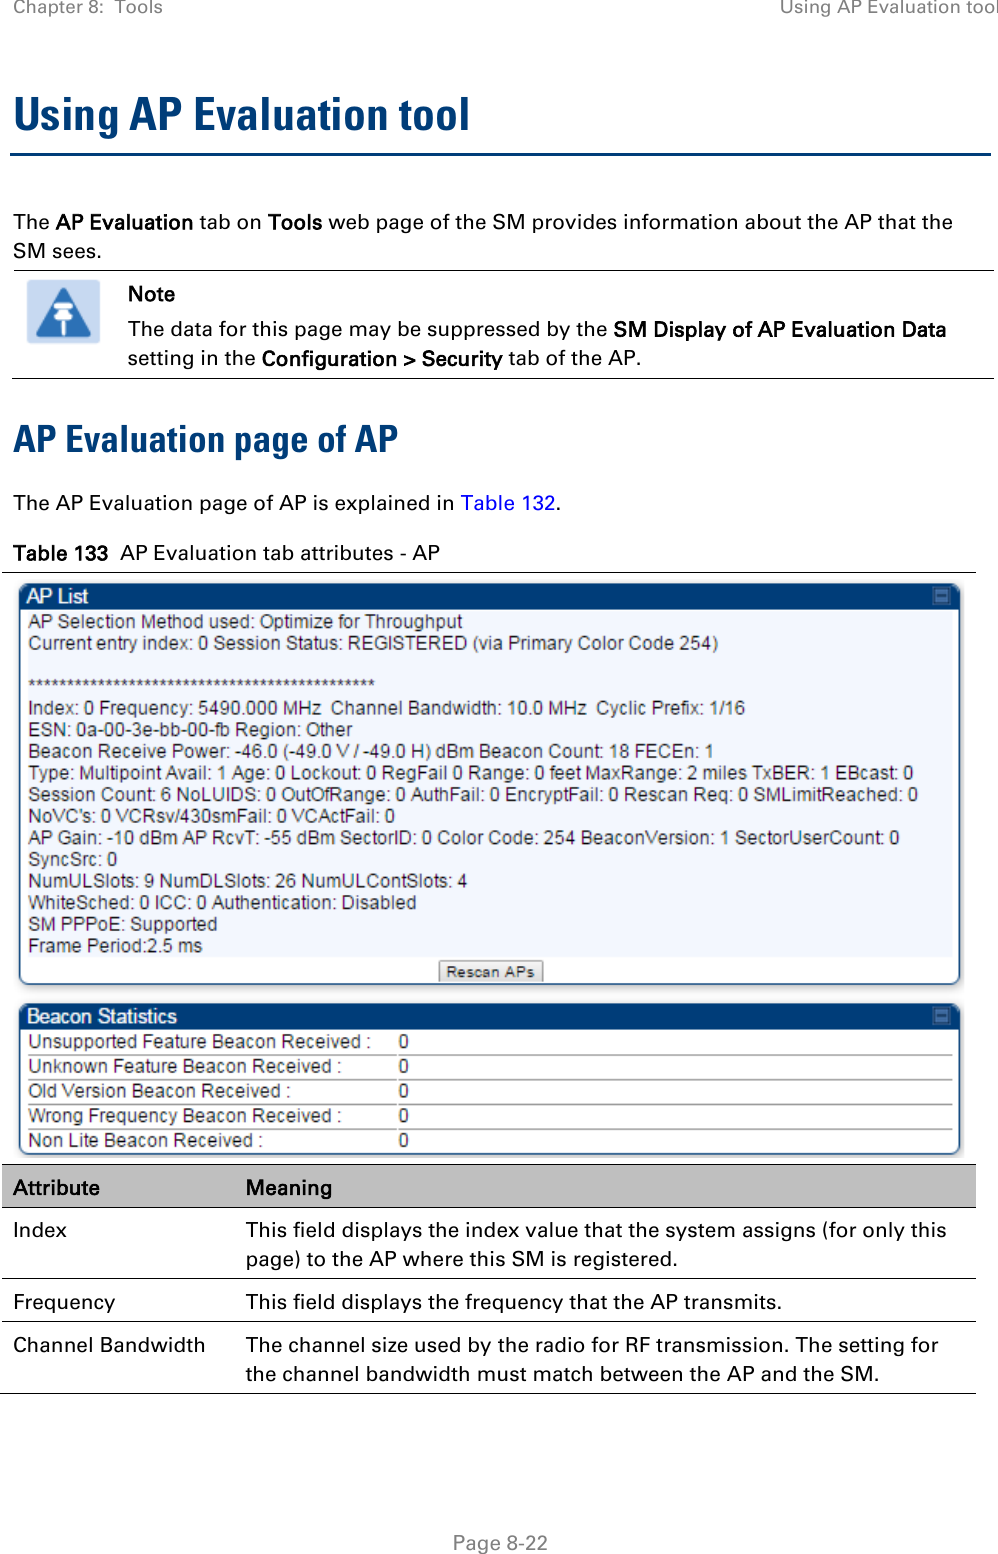 Chapter 8:  Tools Using AP Evaluation tool   Page 8-22 Using AP Evaluation tool The AP Evaluation tab on Tools web page of the SM provides information about the AP that the SM sees.   Note The data for this page may be suppressed by the SM Display of AP Evaluation Data setting in the Configuration &gt; Security tab of the AP. AP Evaluation page of AP The AP Evaluation page of AP is explained in Table 132. Table 133  AP Evaluation tab attributes - AP  Attribute Meaning Index This field displays the index value that the system assigns (for only this page) to the AP where this SM is registered. Frequency This field displays the frequency that the AP transmits. Channel Bandwidth The channel size used by the radio for RF transmission. The setting for the channel bandwidth must match between the AP and the SM.   